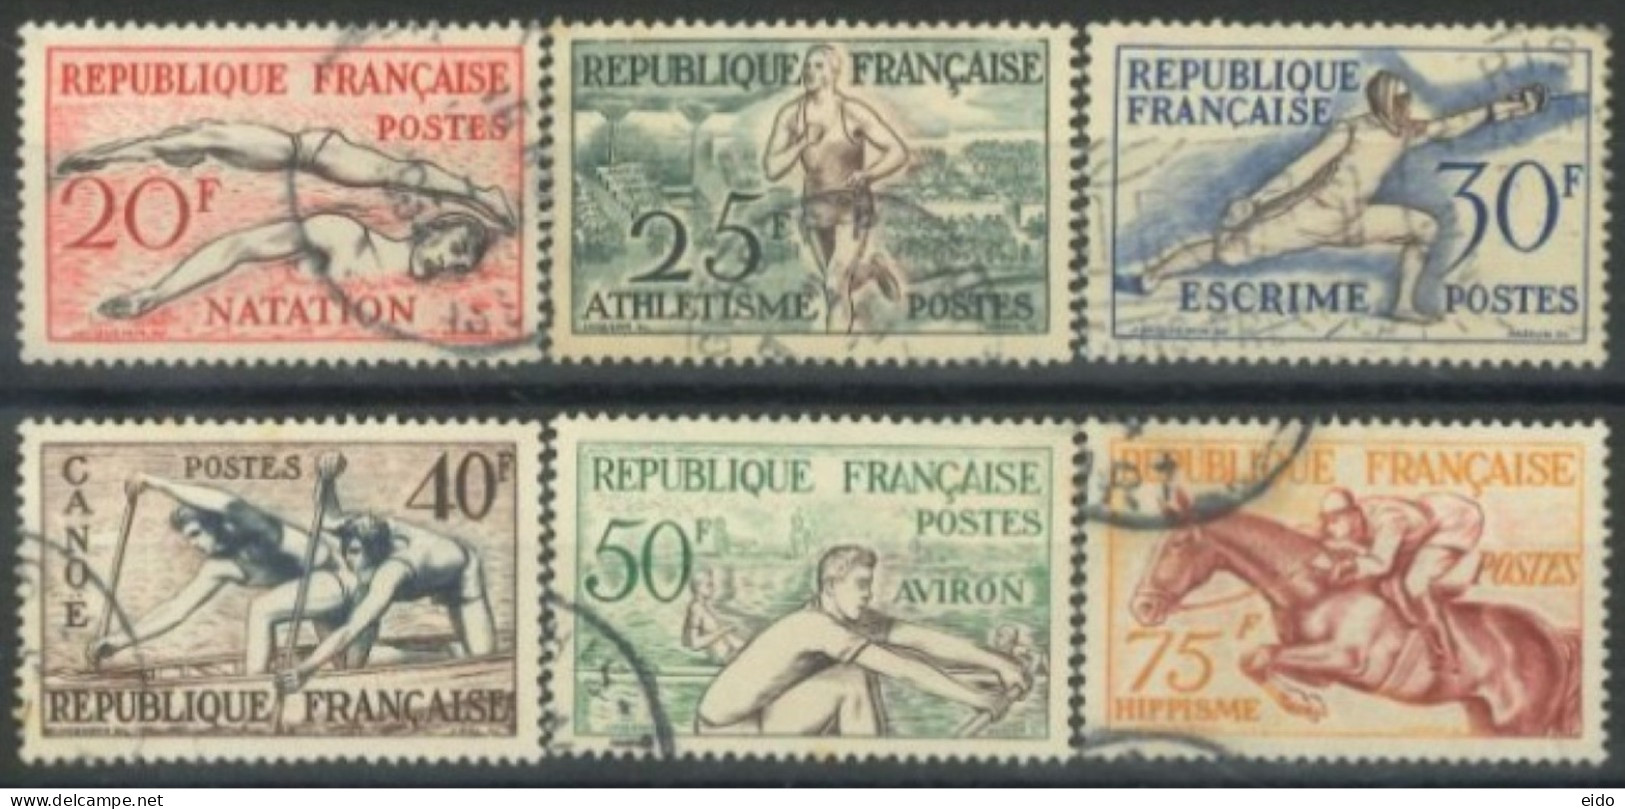 FRANCE - 1953, OLYMPIC GAMES, HELSINKI 1952 STAMPS COMPLETE SET OF 6, USED. - Gebraucht